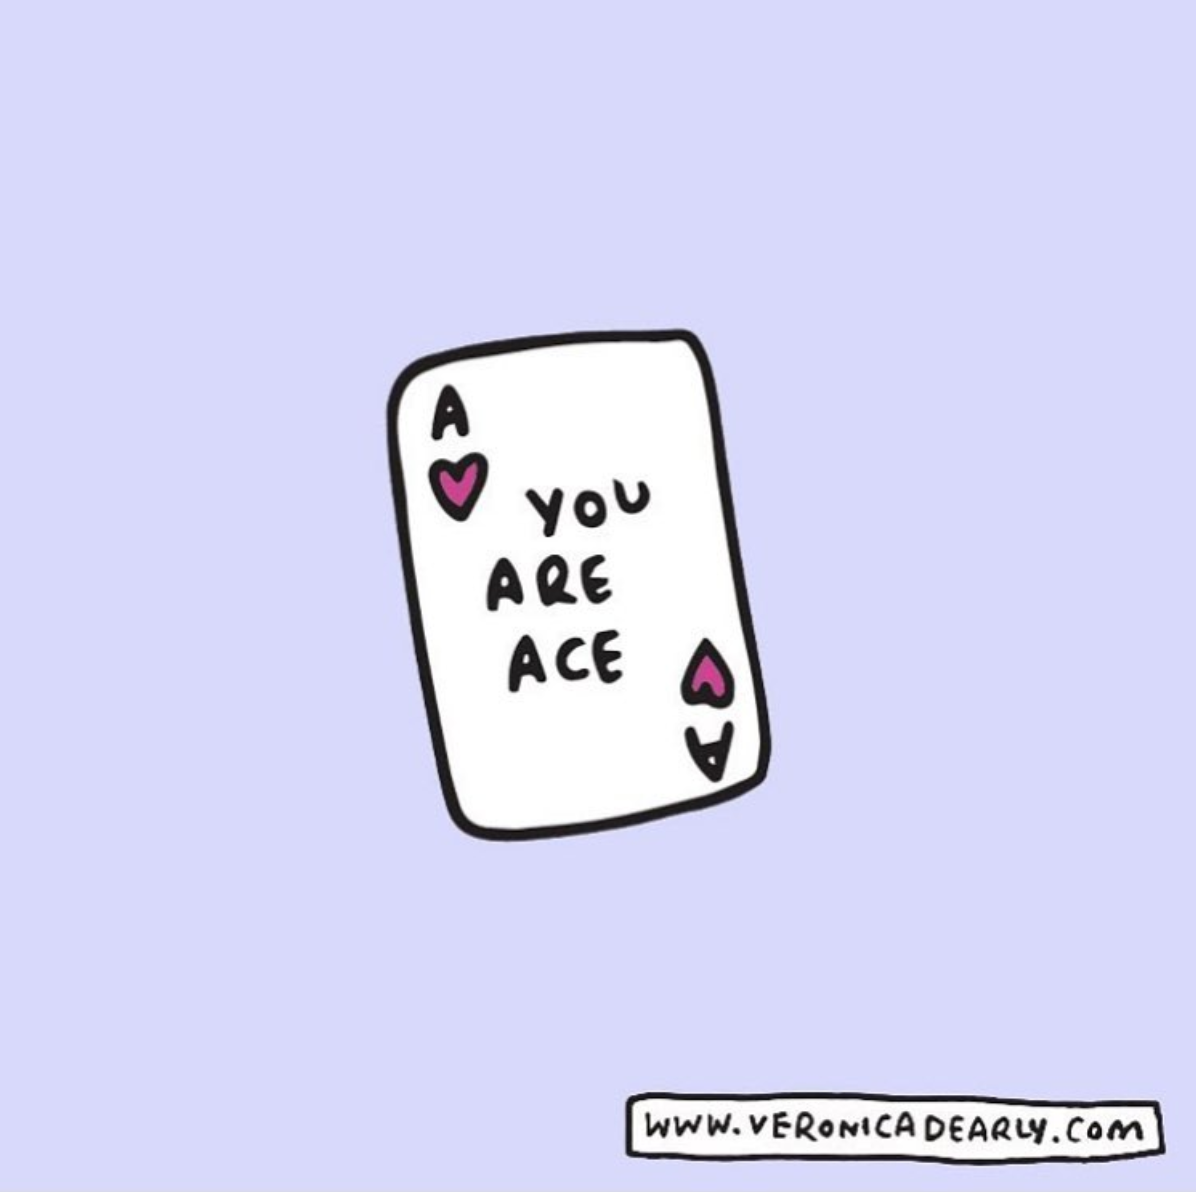 Friday Inspo - You Are Ace!